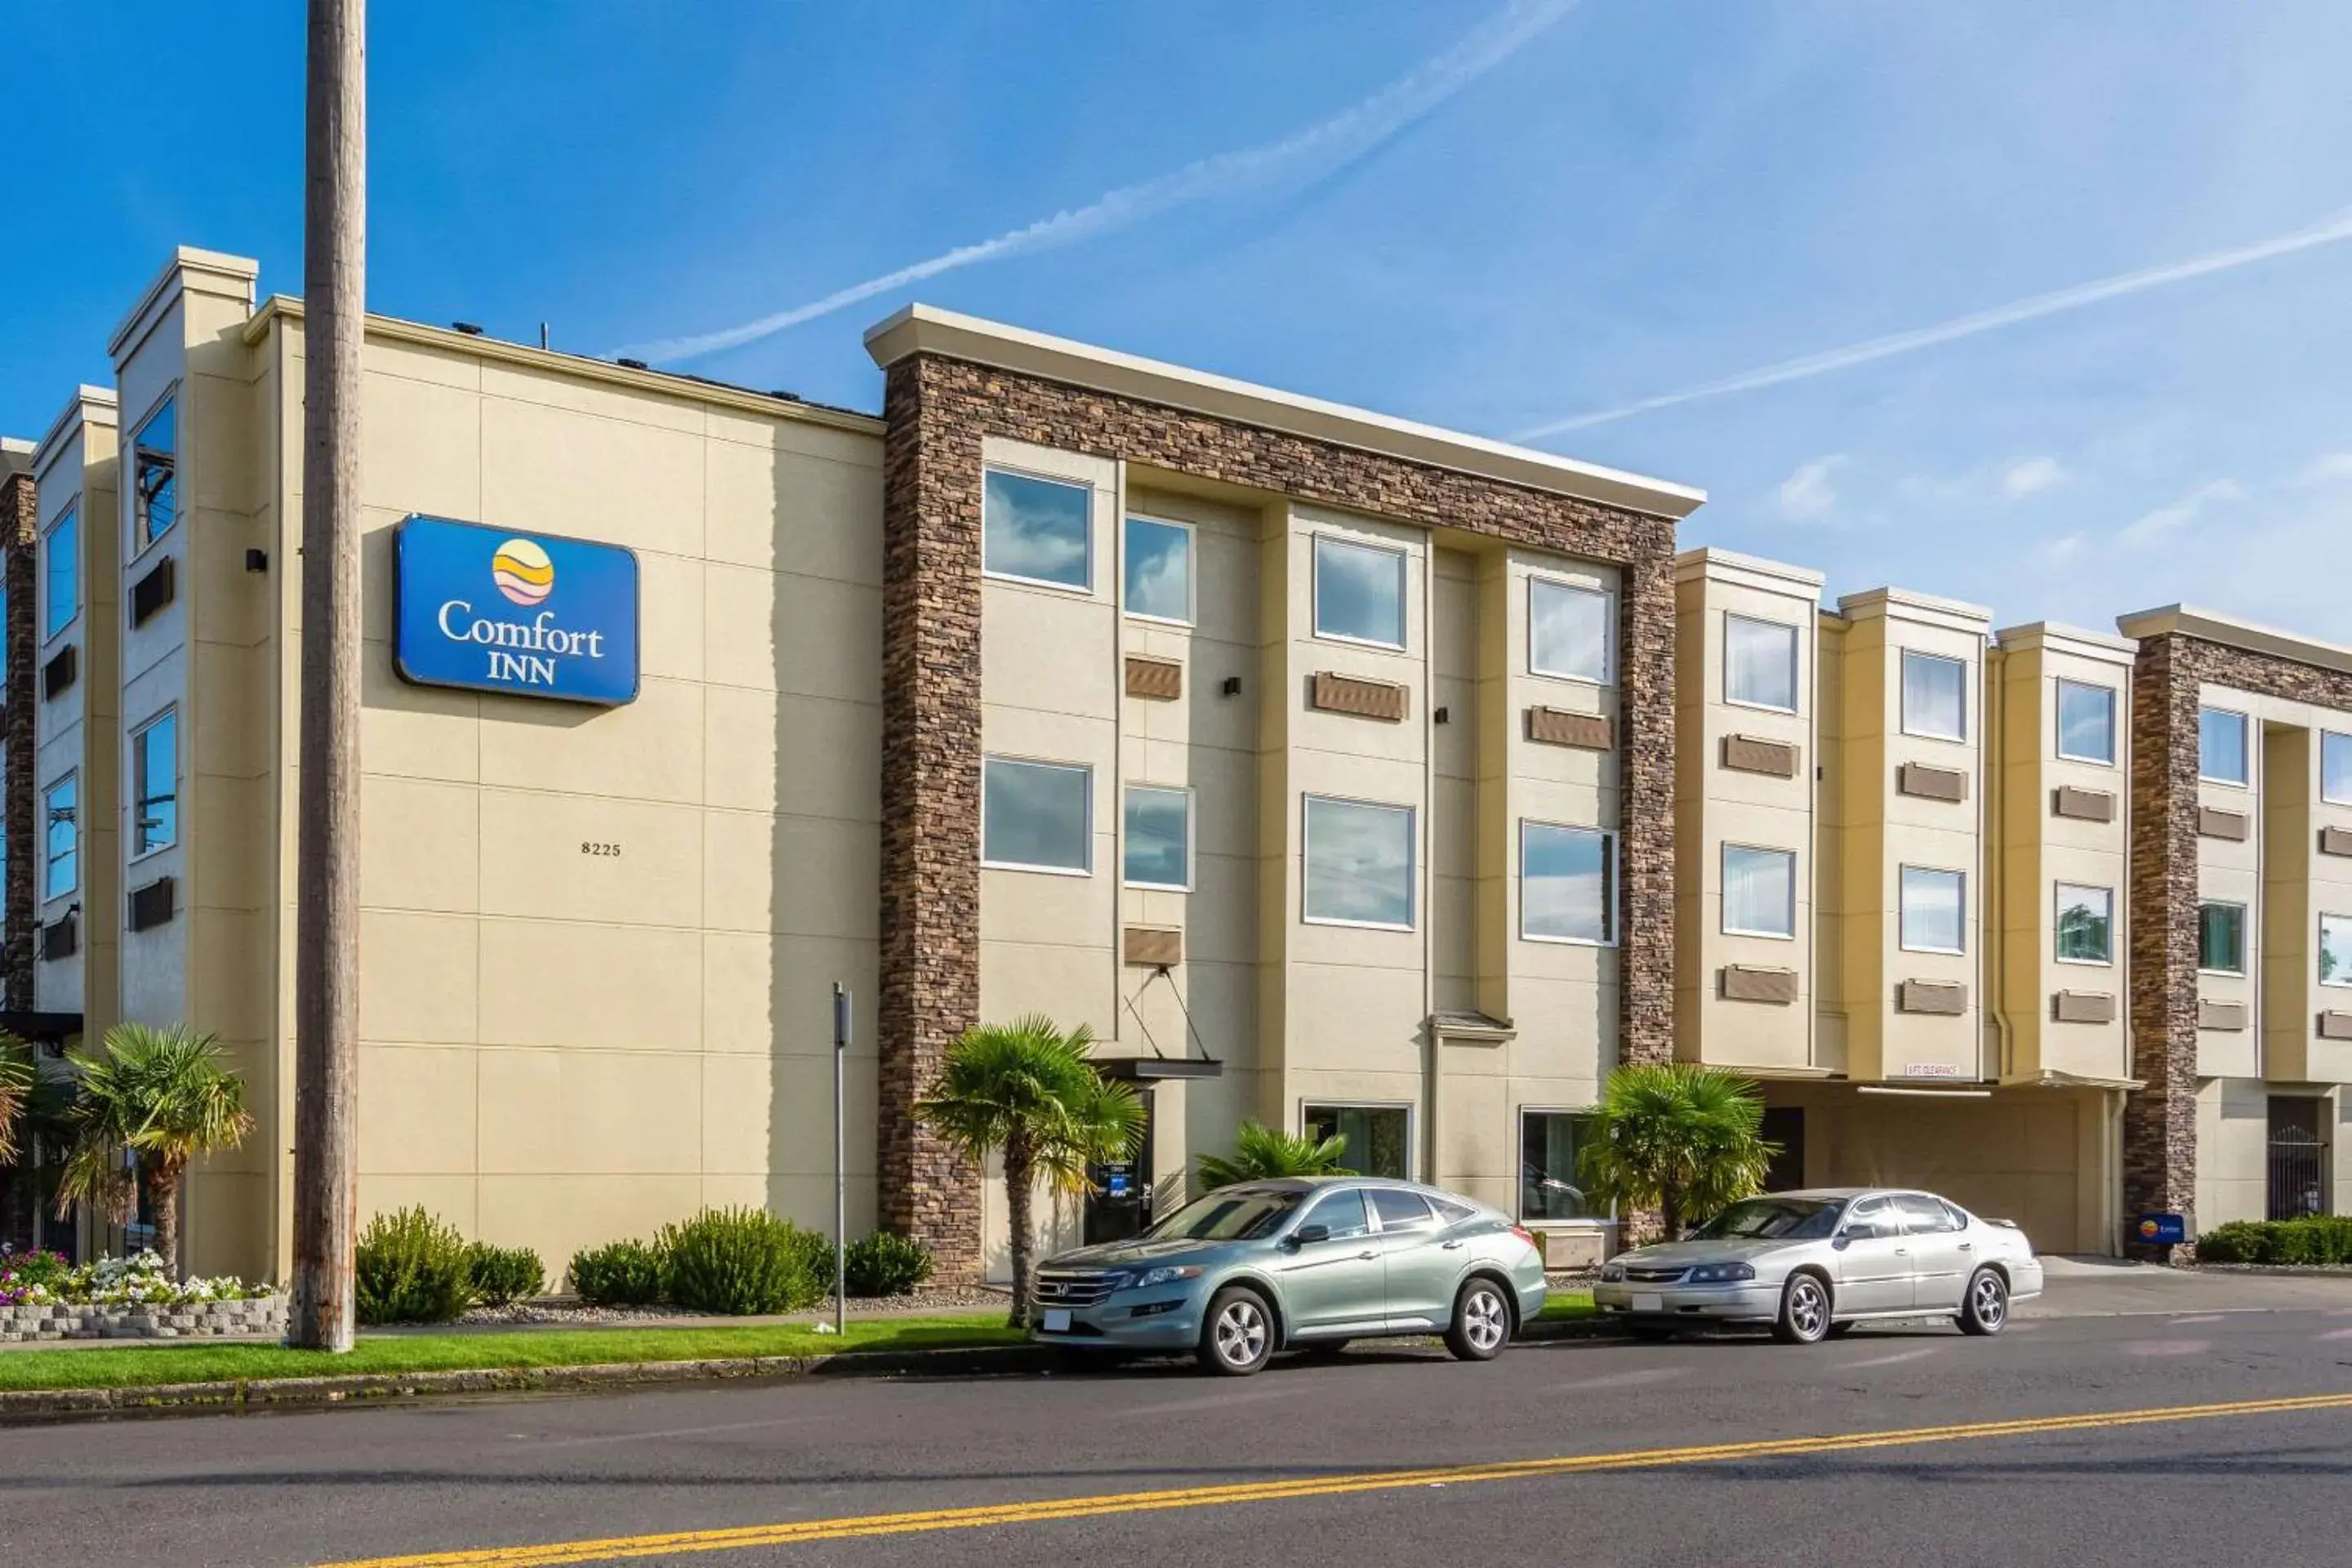 Property Building in Comfort Inn Portland near I-84 and I-205